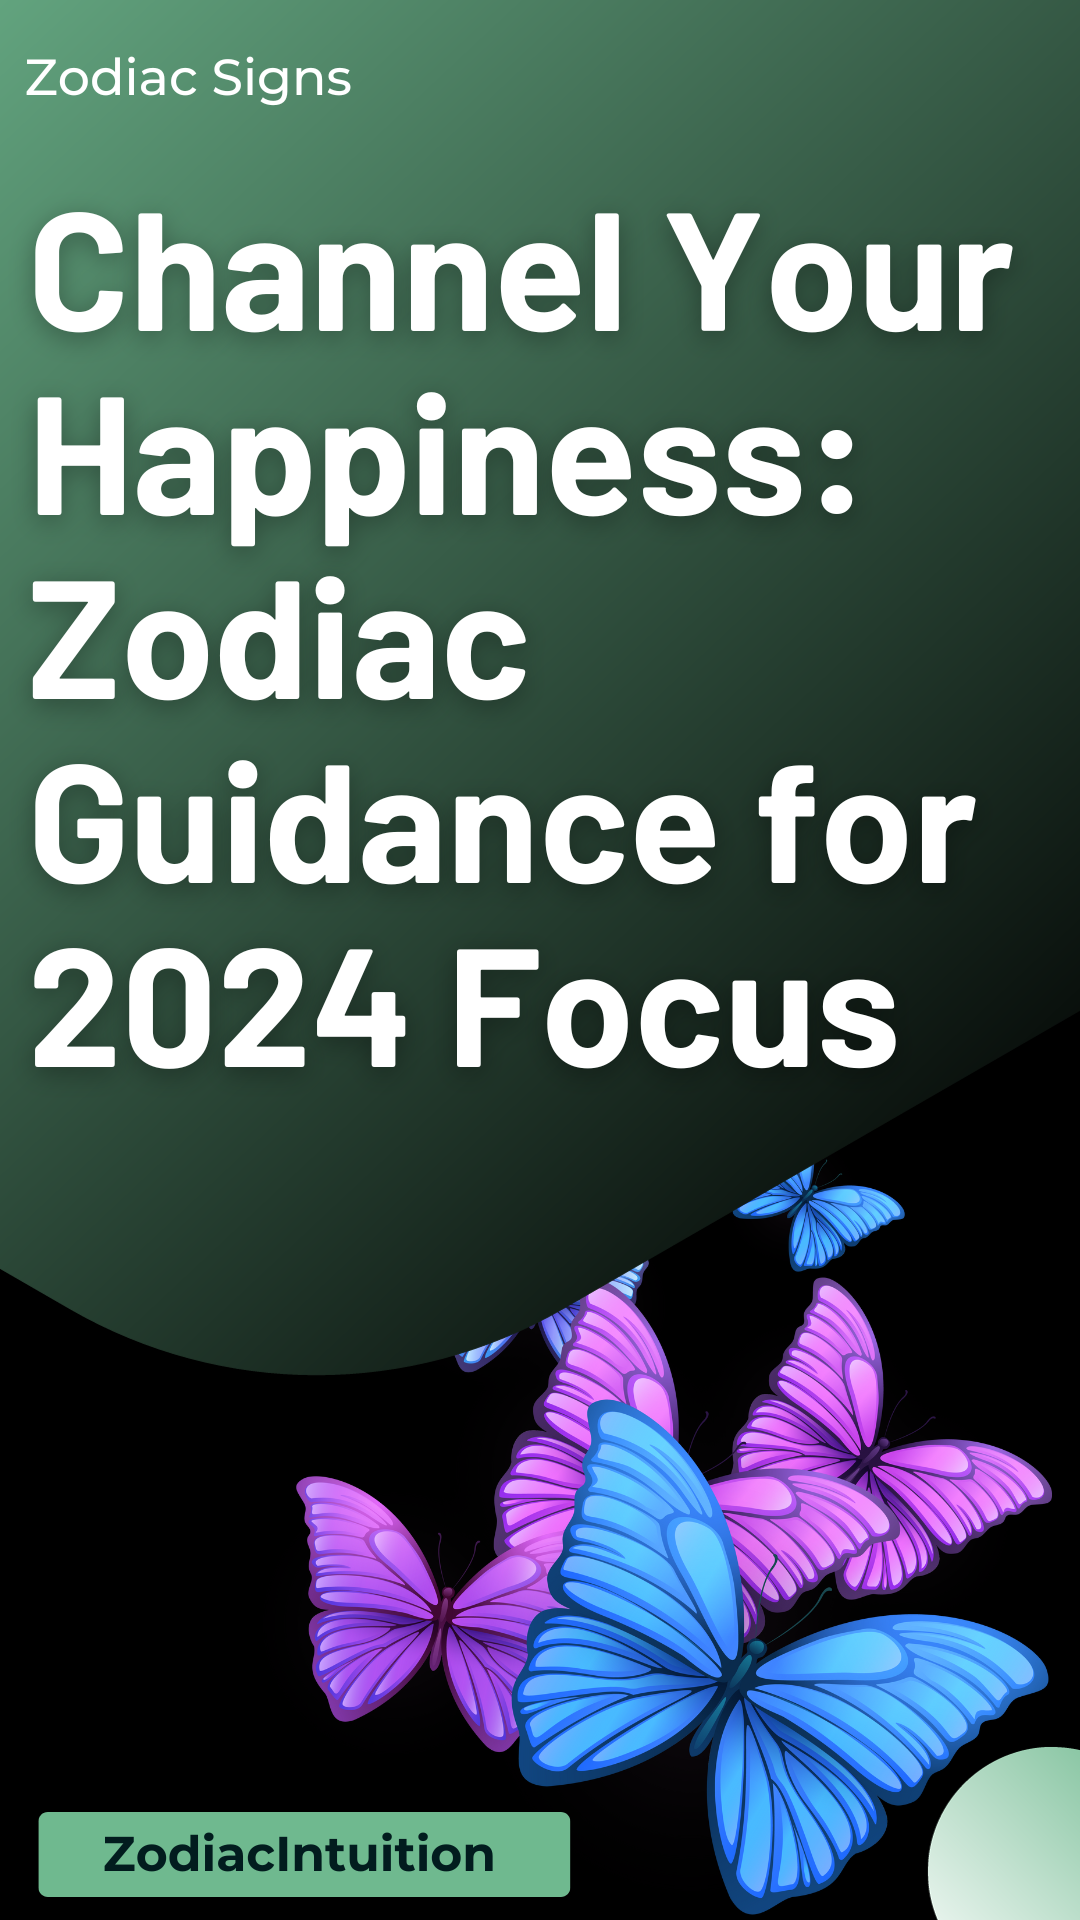 Channel Your Happiness: Zodiac Guidance for 2024 Focus